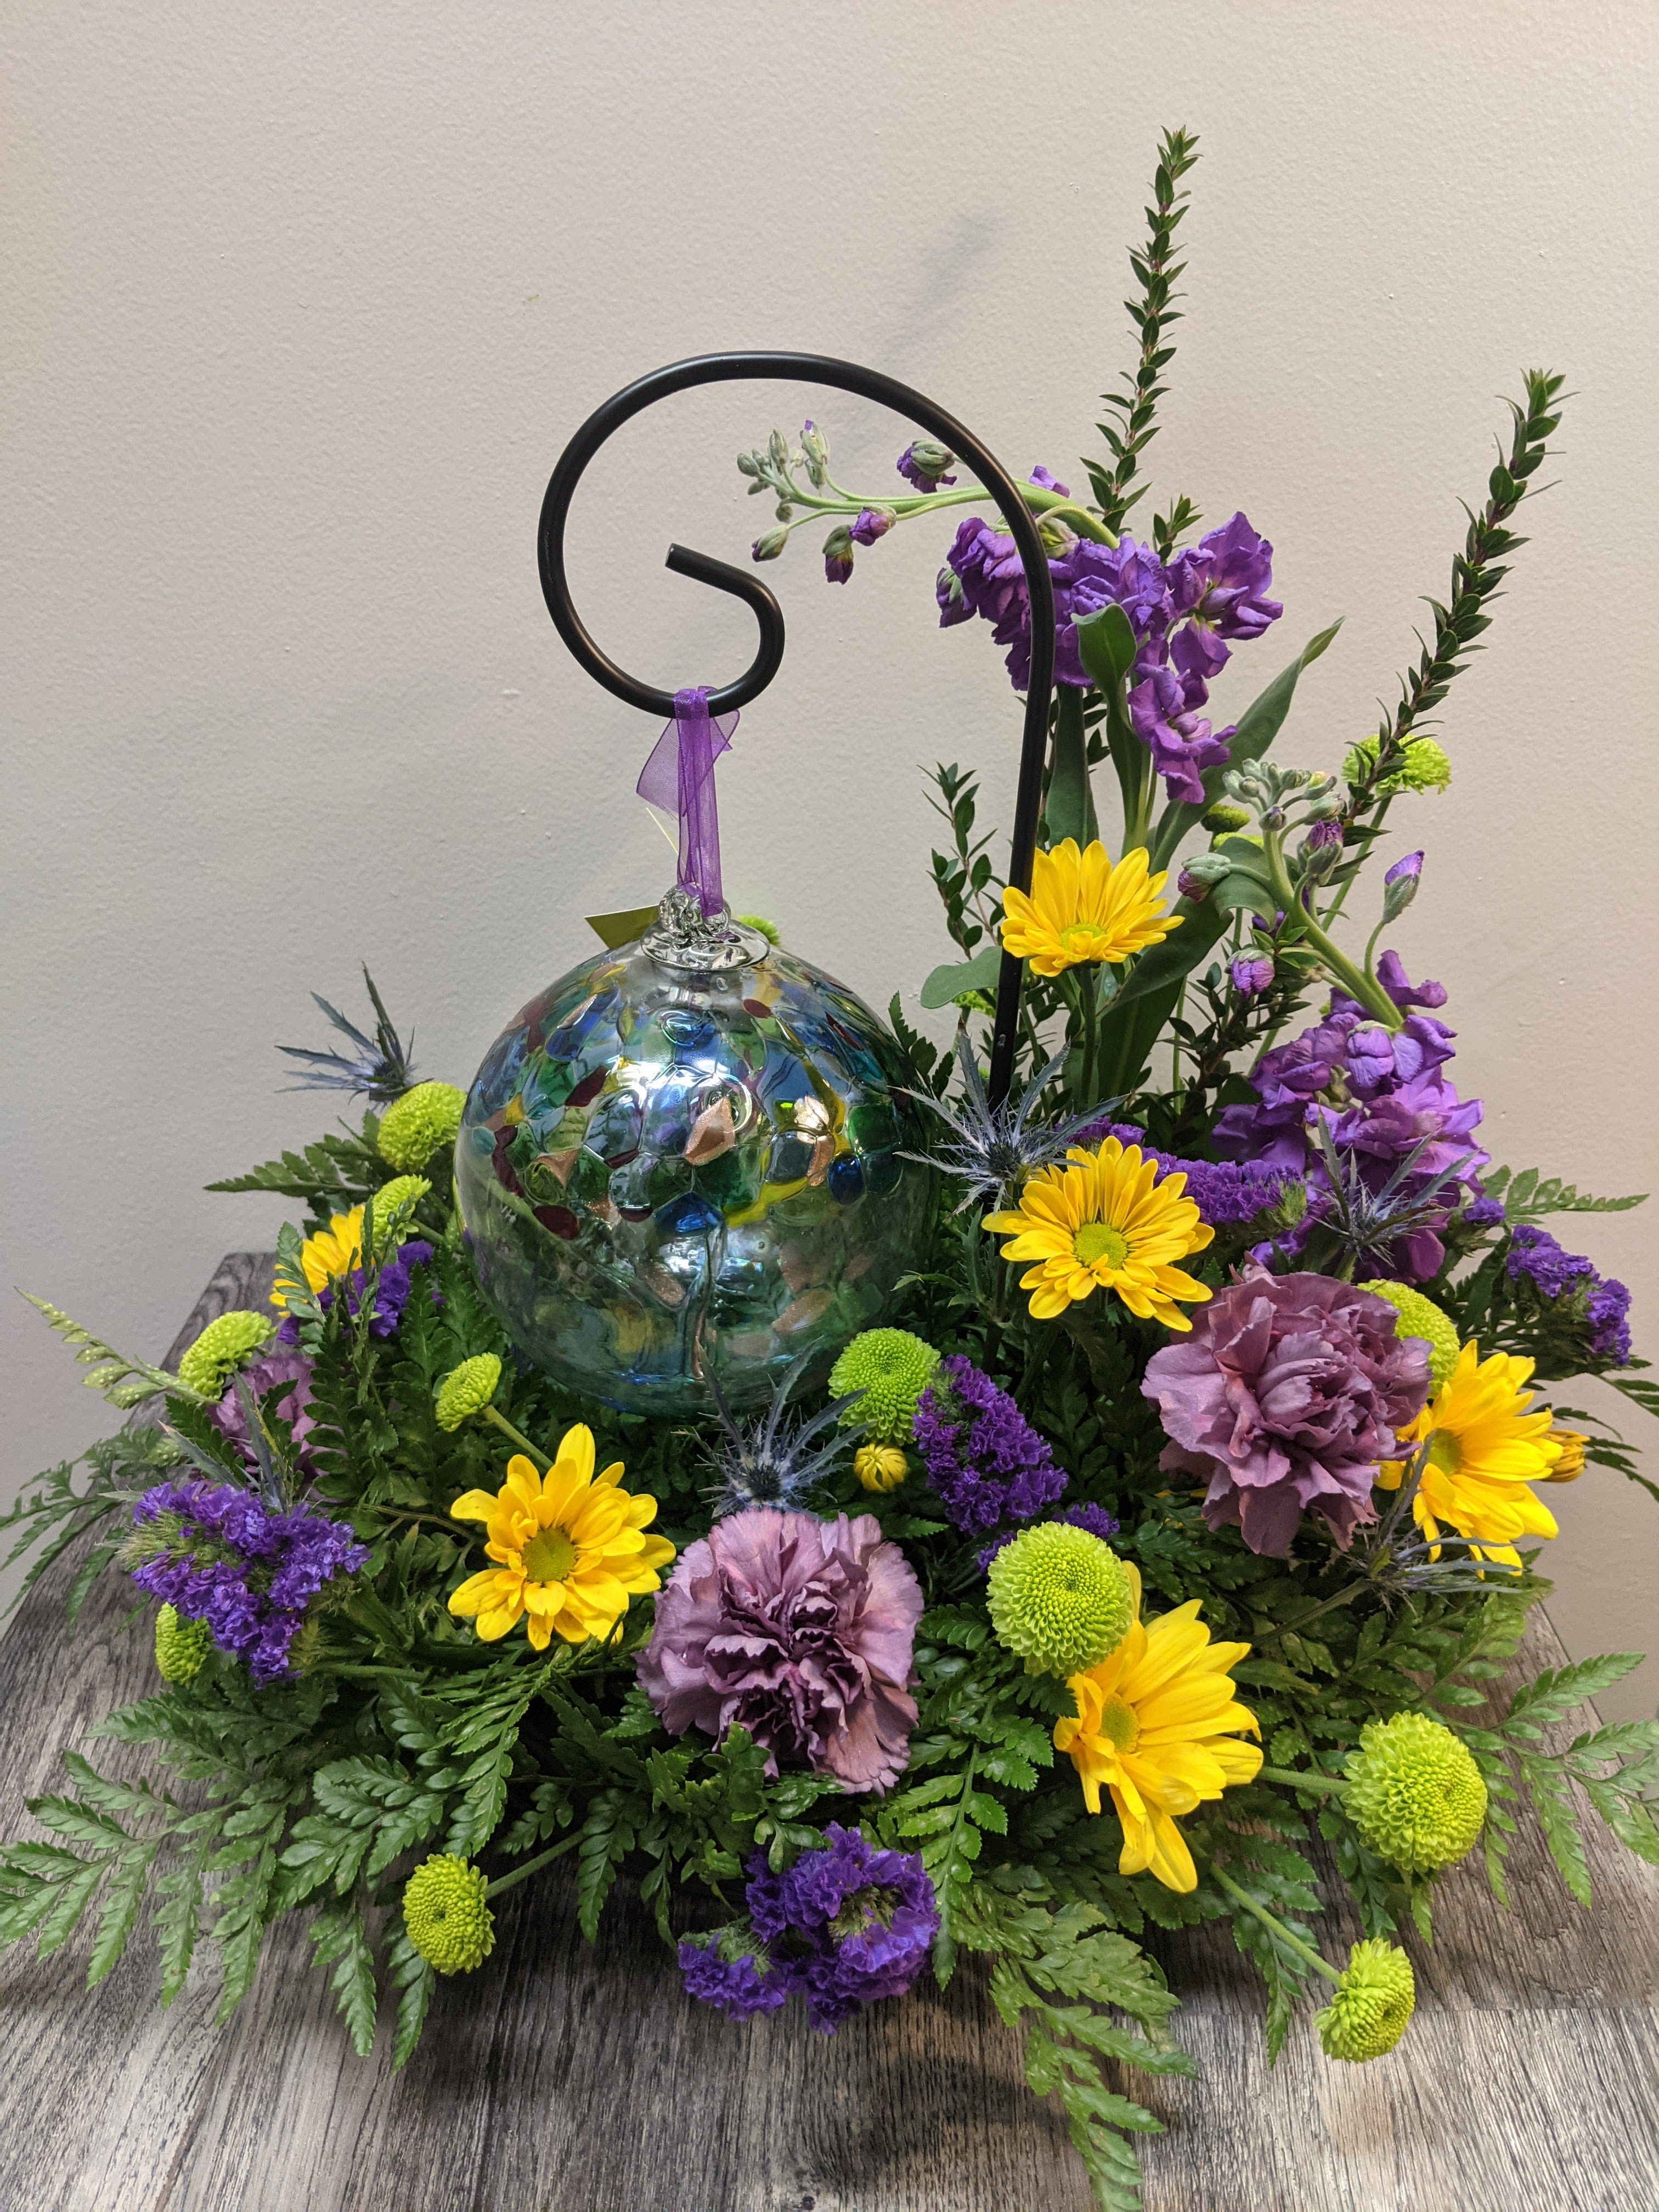 Kitras Hand Blown Art with fresh Flowers  - This beautiful hand blown Kitras Ball is a favorite here in our shop! Unique and one of a kind, Kitras Art is the perfect option for a keepsake gift with a touch of fresh flowers!   *Colors of Kitras Ball will vary based on availability. Flowers will match accordingly and may vary other than pictured. 